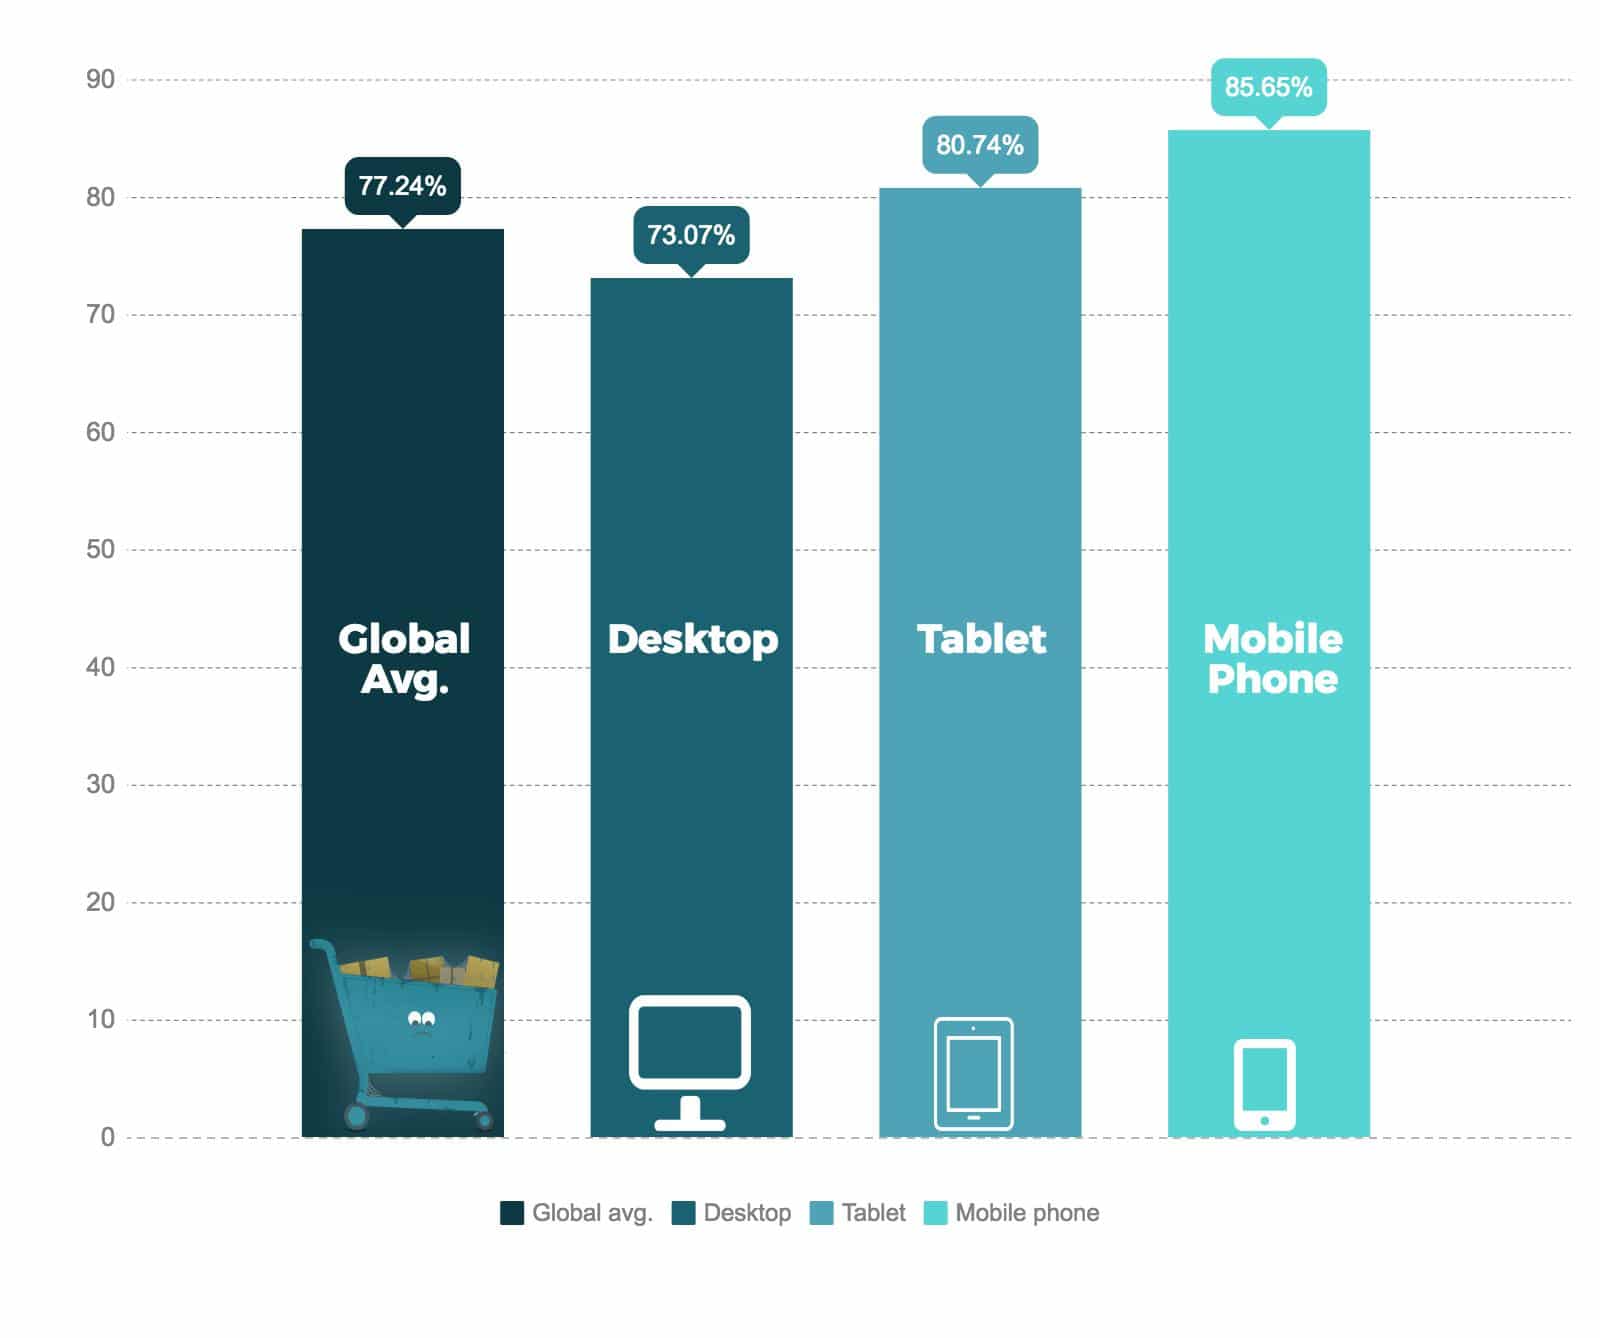 Cart-abandonment-is-high-across-all-devices